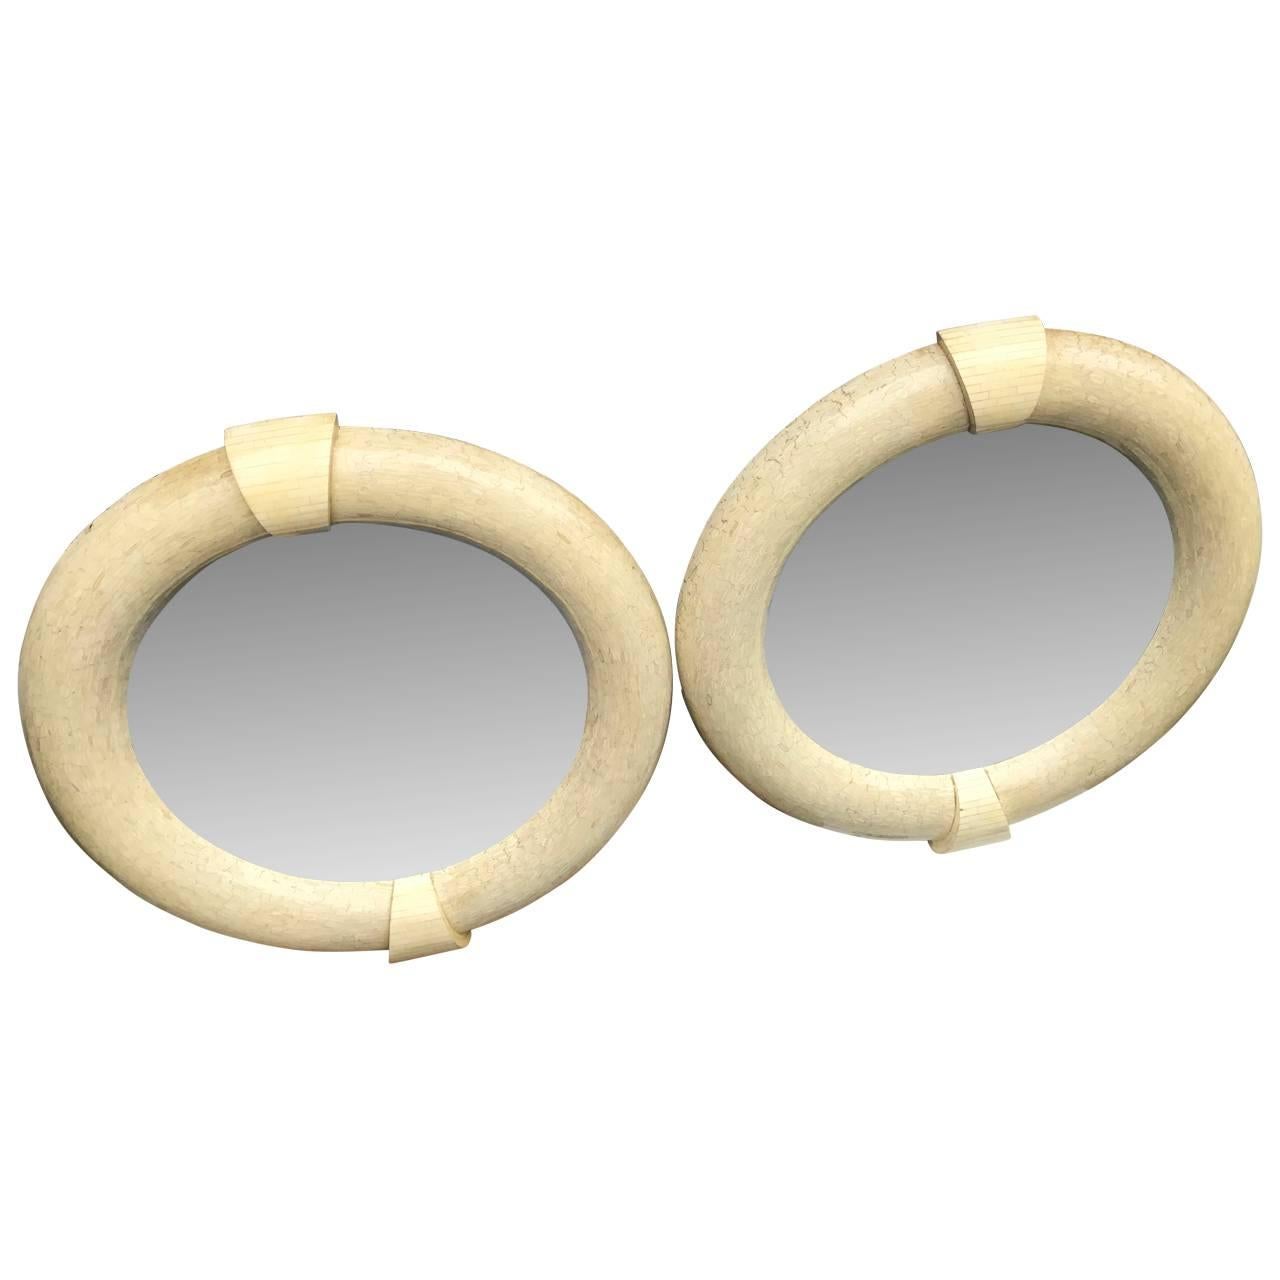 Pair Of Large  Mid-Century Modern Karl Springer Tessellated Round Wall Mirrors

Very rare pair of large Mid-Century Modern mirrors, spanning 48 inches wide and 51.5 inches tall.
The four keystones are tessellated in plain vintage white bone and the